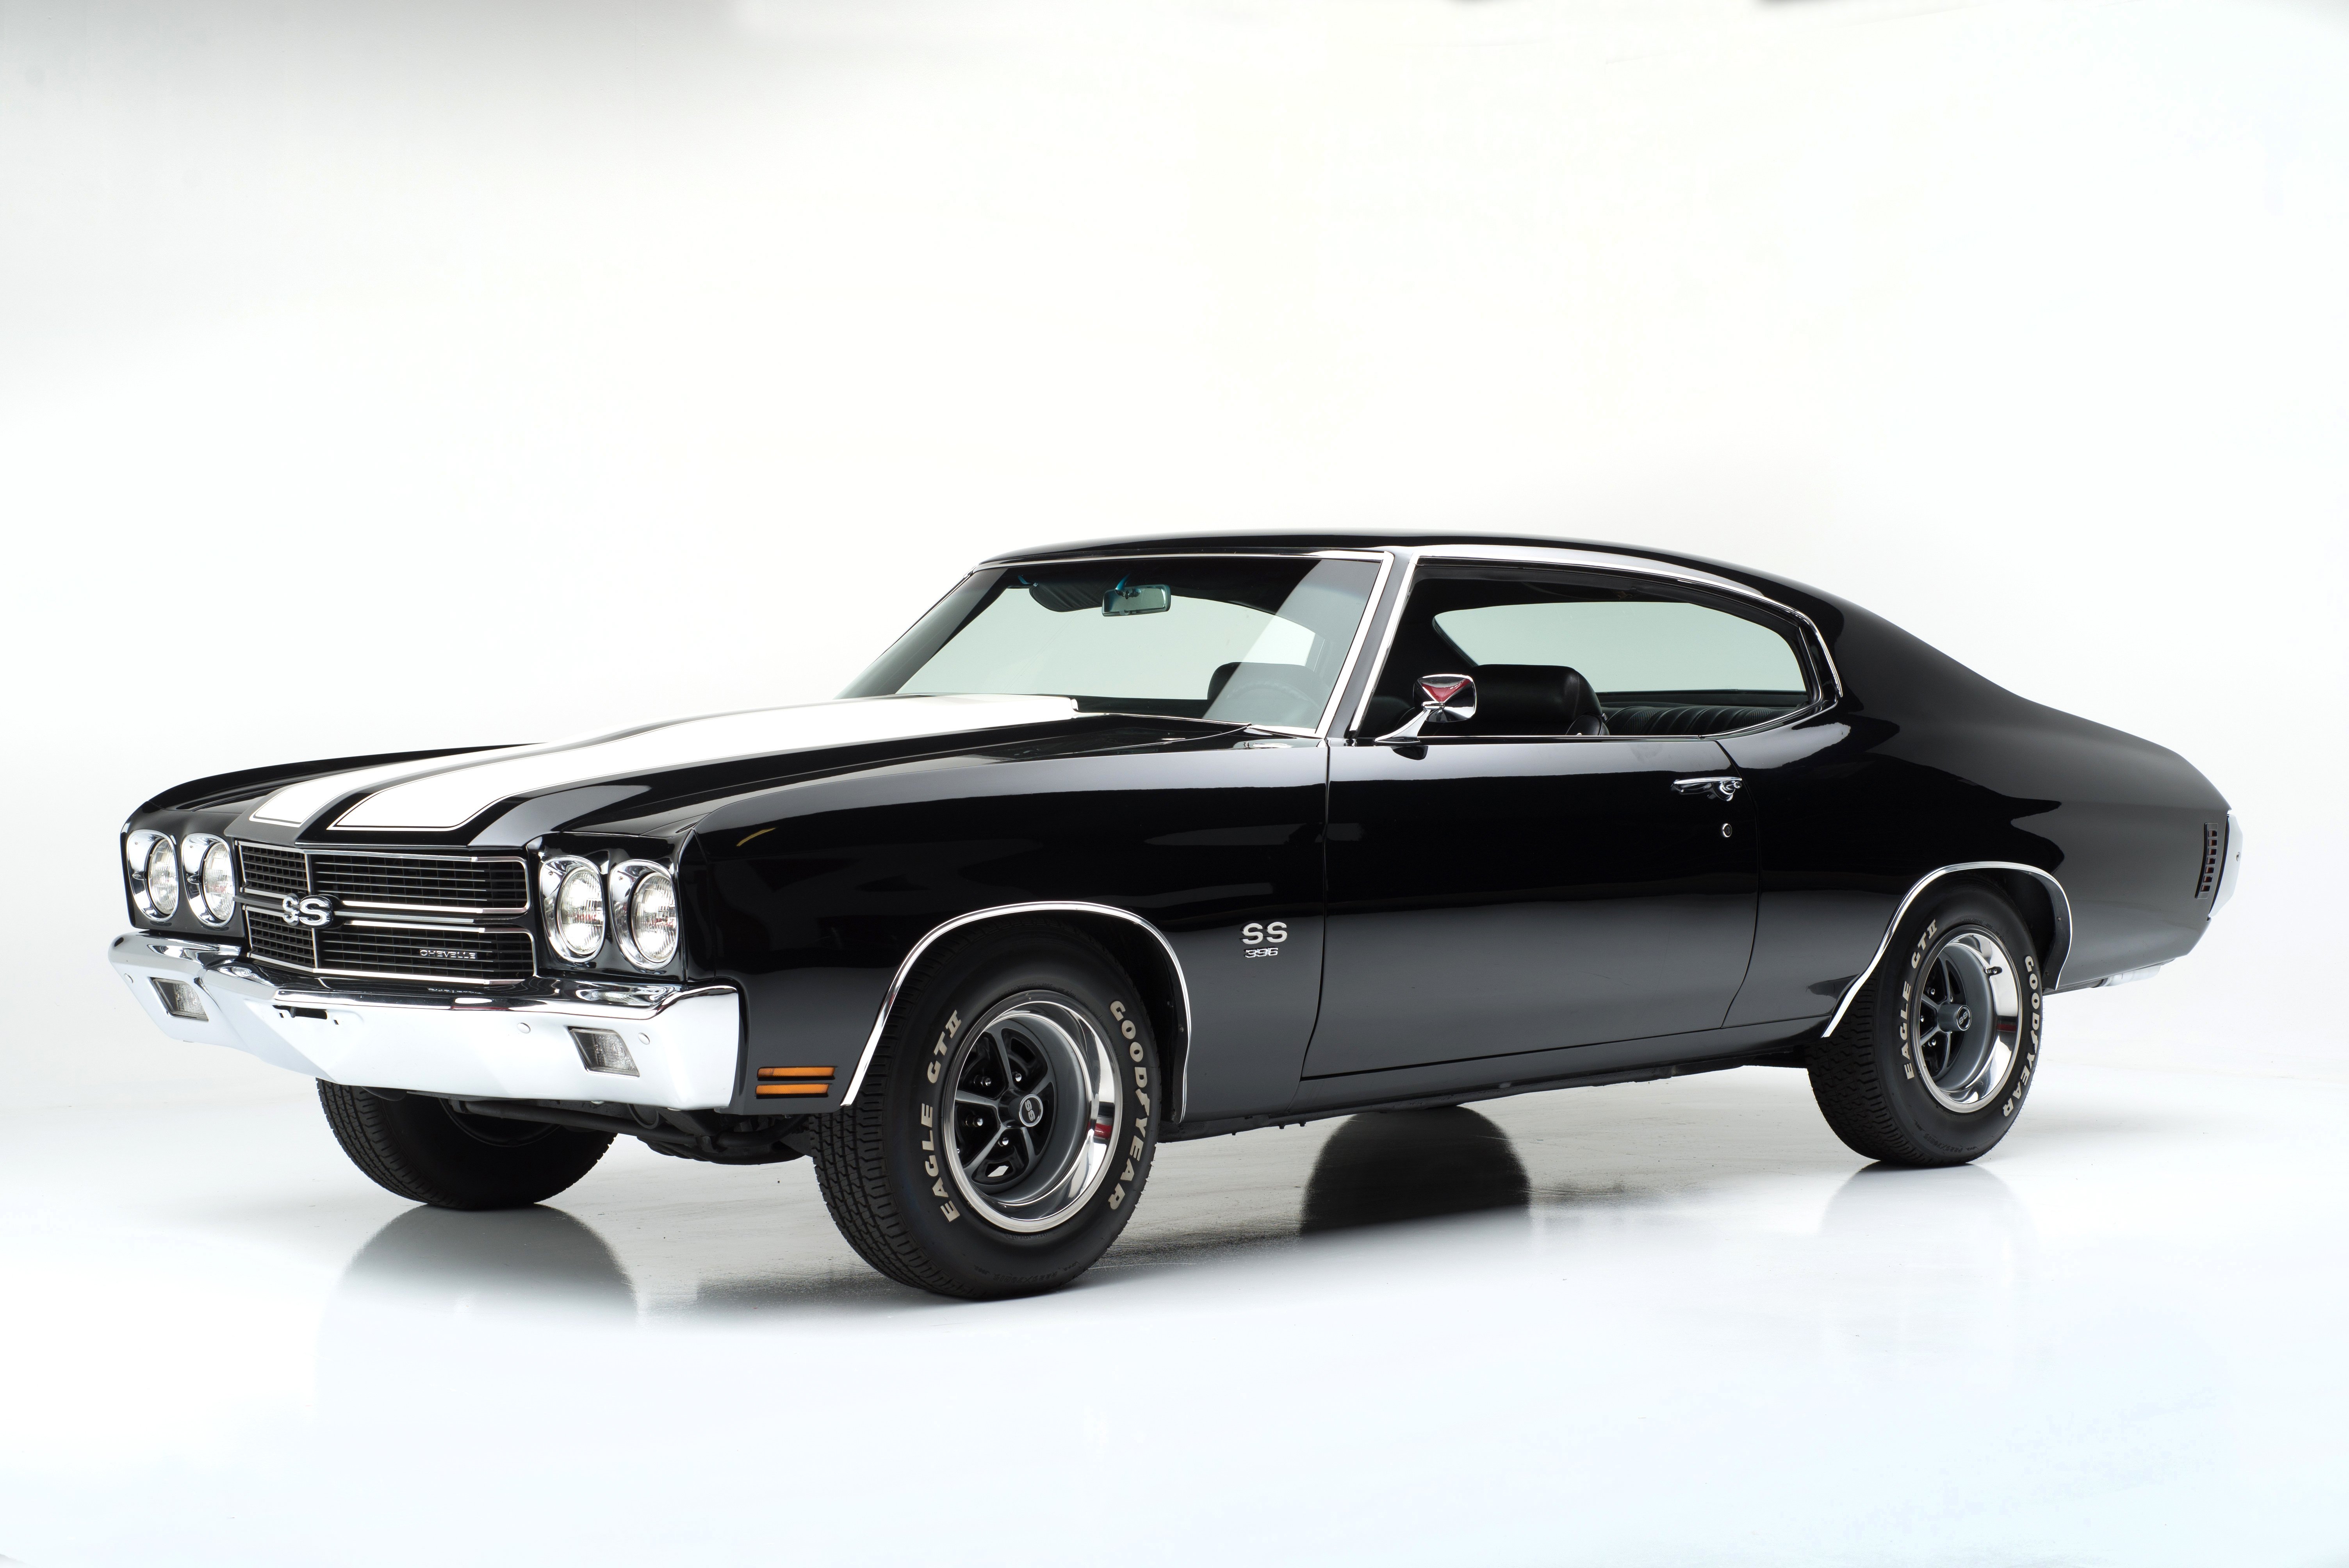 1970 CHEVROLET CHEVELLE SS 396 muscle classic s s d